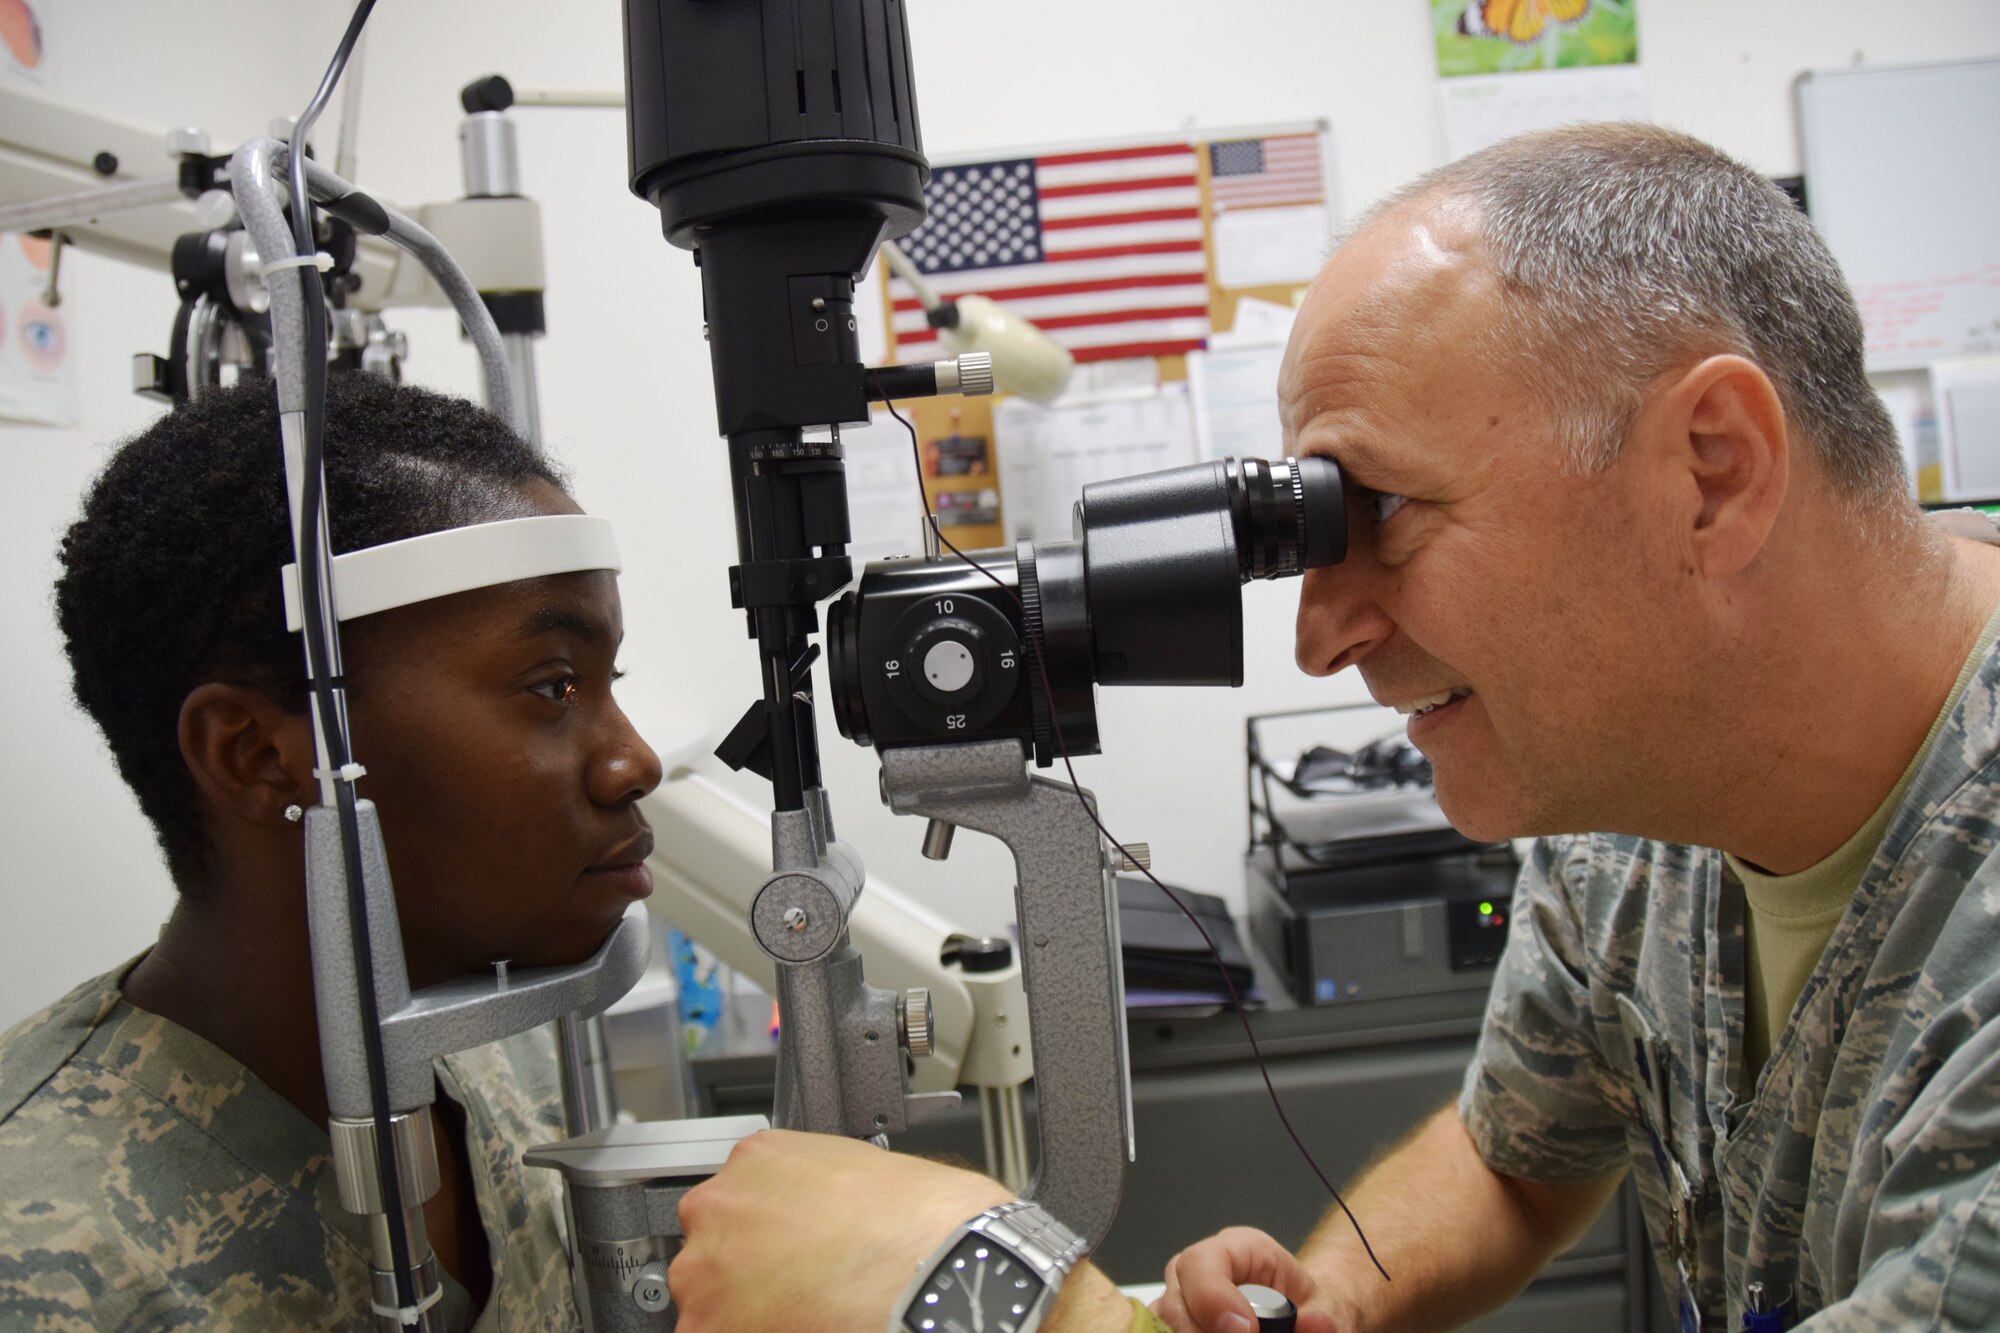 Lt. Col. Timothy Landis, an optometrist at the 379th Expeditionary Medical Operations Squadron, conducts an eye exam on Staff Sgt. Leonae Franklin, a dental technician at 379th EMDOS, Aug. 2, 2016, at Al Udeid Air Base, Qatar. An eye exam at the optometry clinic can identify vision problems; the clinic can then develop and implement an eye care plan to correct any issues. (U.S. Air Force photo/Technical Sgt. Carlos J. Treviño/Released)